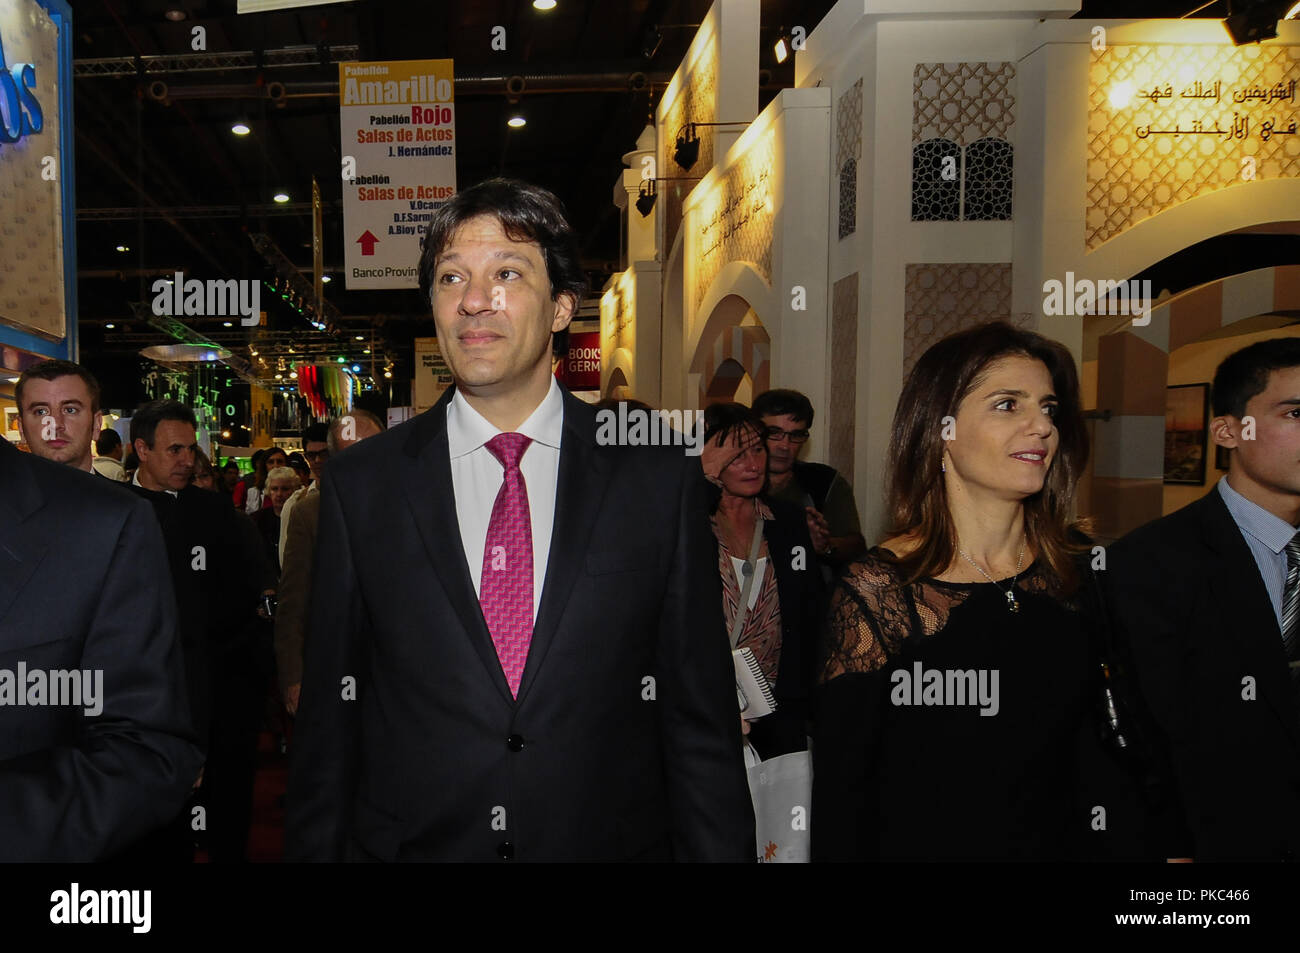 Firmat, Santa Fe, Argentina. 24th Apr, 2014. Fernando Haddad, at the time Mayor of Sao Paulo, with his wife Ana Estela during a visit to Buenos Aires' Book Fair. Haddad has been appointed to replace Inazio Lula da Silva as the PT (Workers Party) Presidential candidate for the upcoming elections. Credit: Patricio Murphy/ZUMA Wire/Alamy Live News Stock Photo